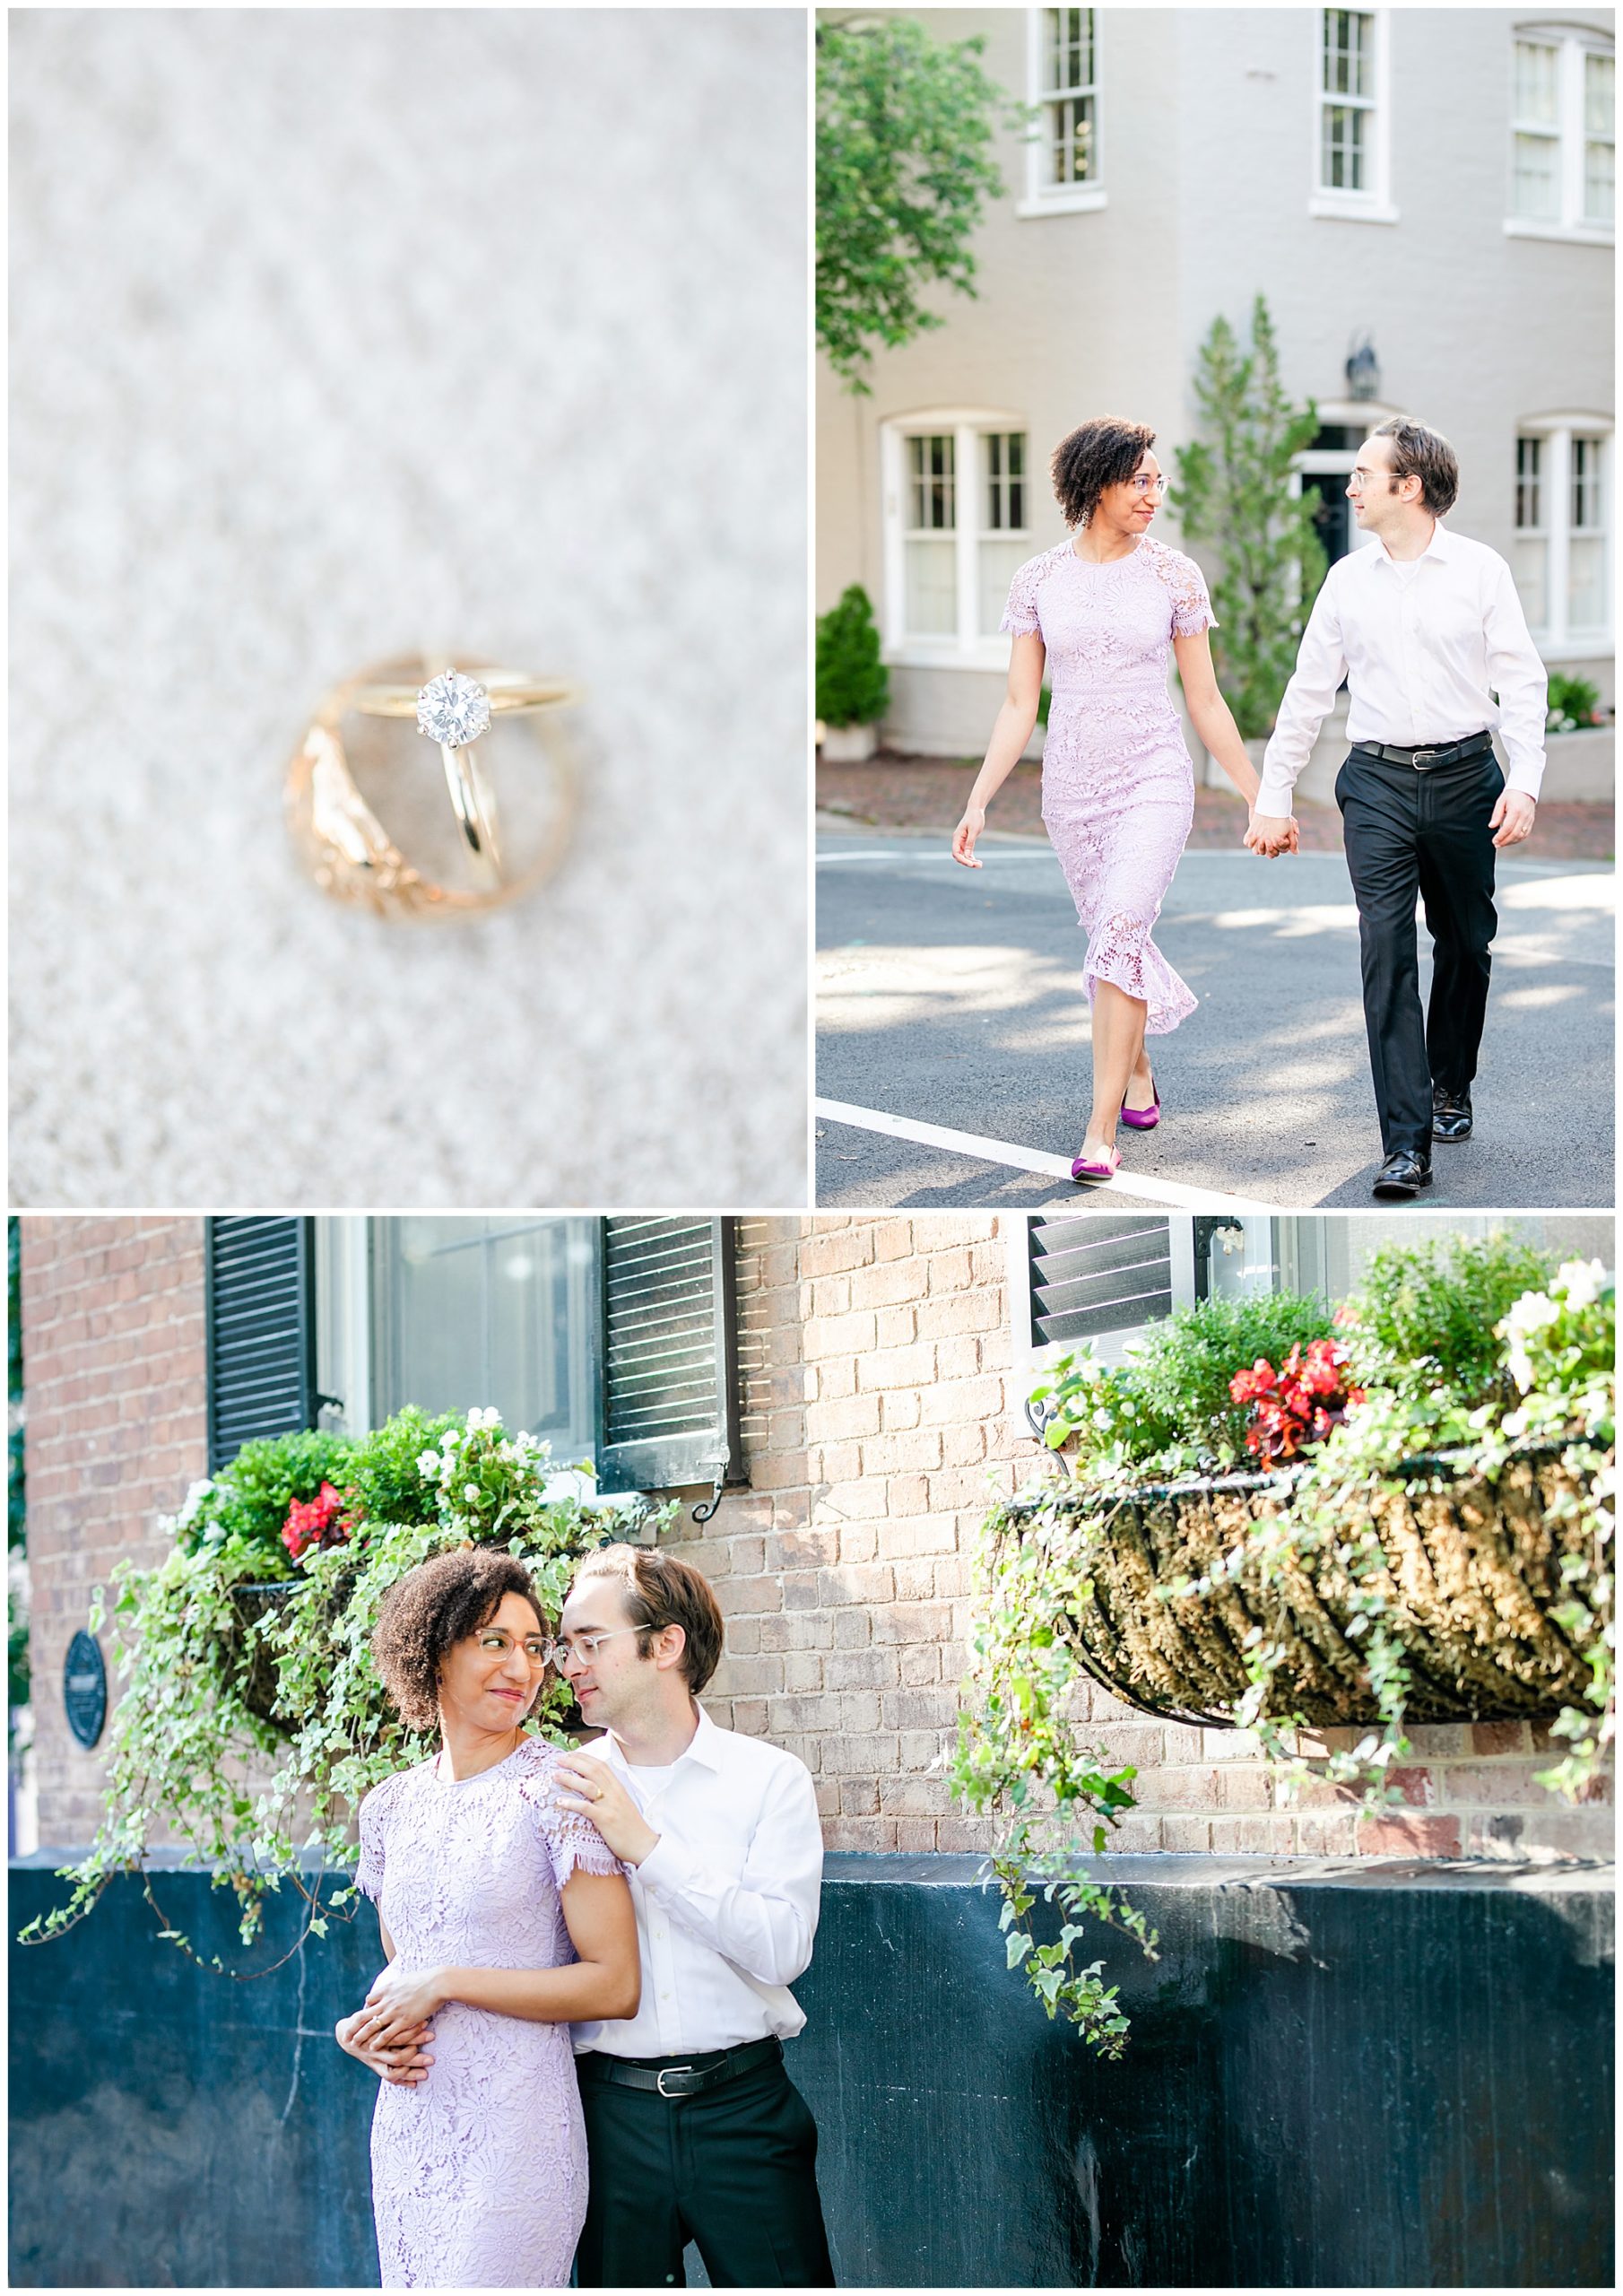 Old Town Alexandria wedding portraits, Alexandria Virginia wedding photographer, Alexandria Virginia photographer, Rachel E.H. Photography, D.C. wedding photographer, D.C. engagement photographer, D.C. photographer, Virginia wedding photographer, wedding photos, D.C. micro wedding photographer, D.C. elopement photographer, gold wedding rings, historic town, gold wedding rings